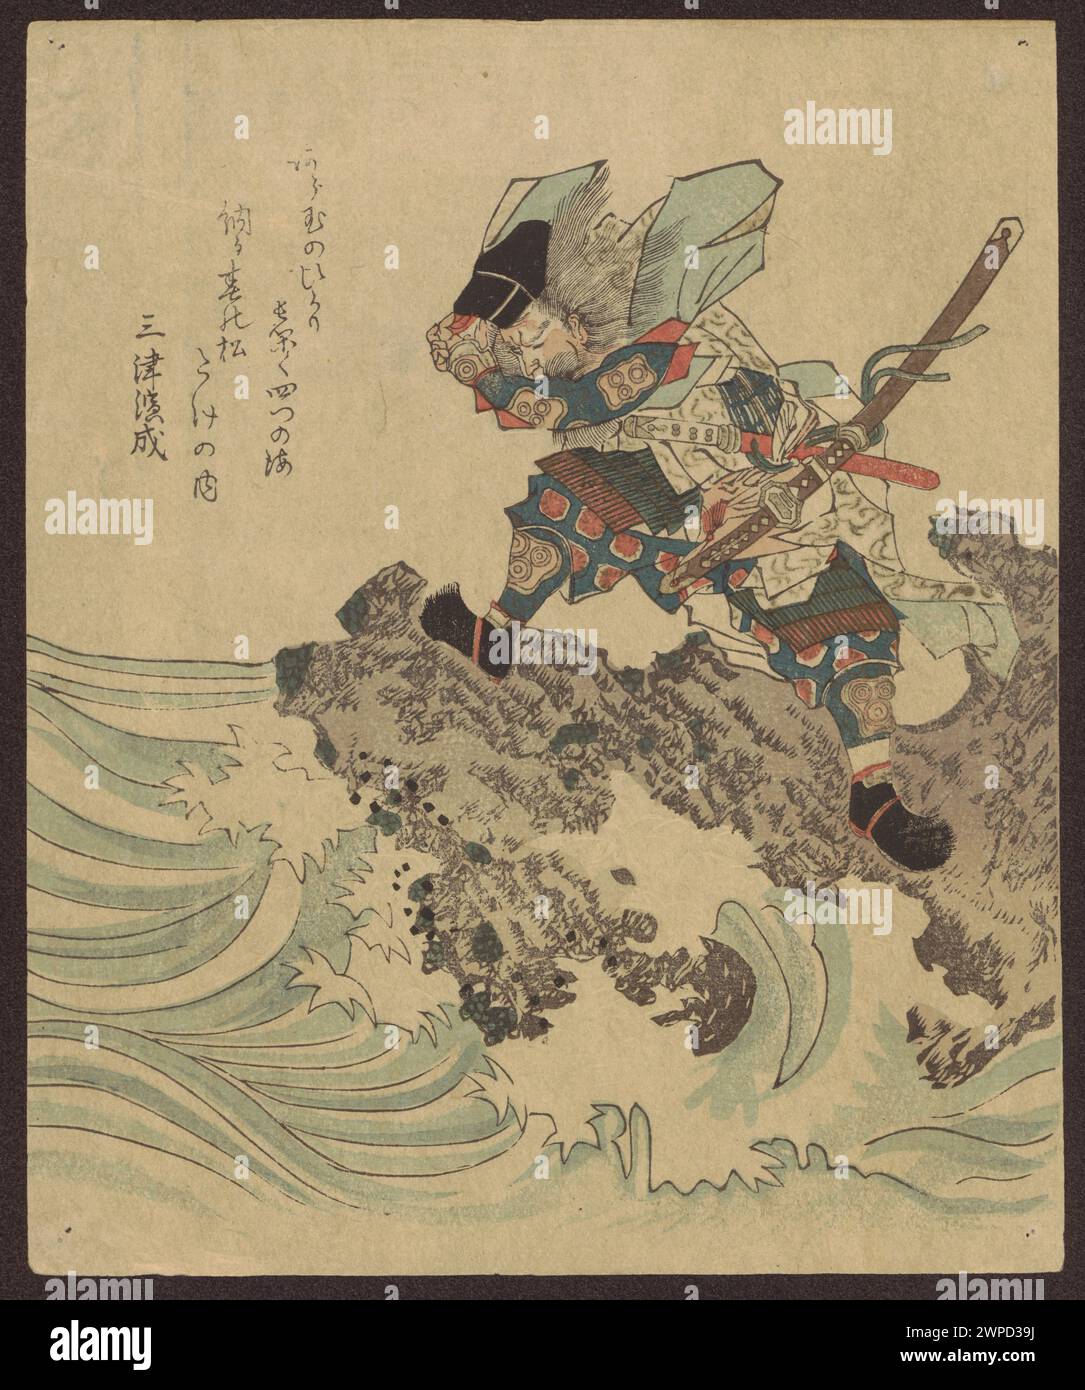 Takenouchi-no Subune, from the series 'Pi Ads of the Display (Kotobuki Goban-No Uchi); Surimono, Copy; Yanagawa, Shigenobu I (1787-1832); around 1890-1900 (1890-00 -00-1900-00-00); was downloaded from the Muse of the National Museum in Warsaw; graphic / convex printing / woodcut / coloring woodcut; products from Wzkien / Paper; height 22.2 cm, width 18.0 CM; SKAZG 1001 MNW; all rights reserved. Stock Photo